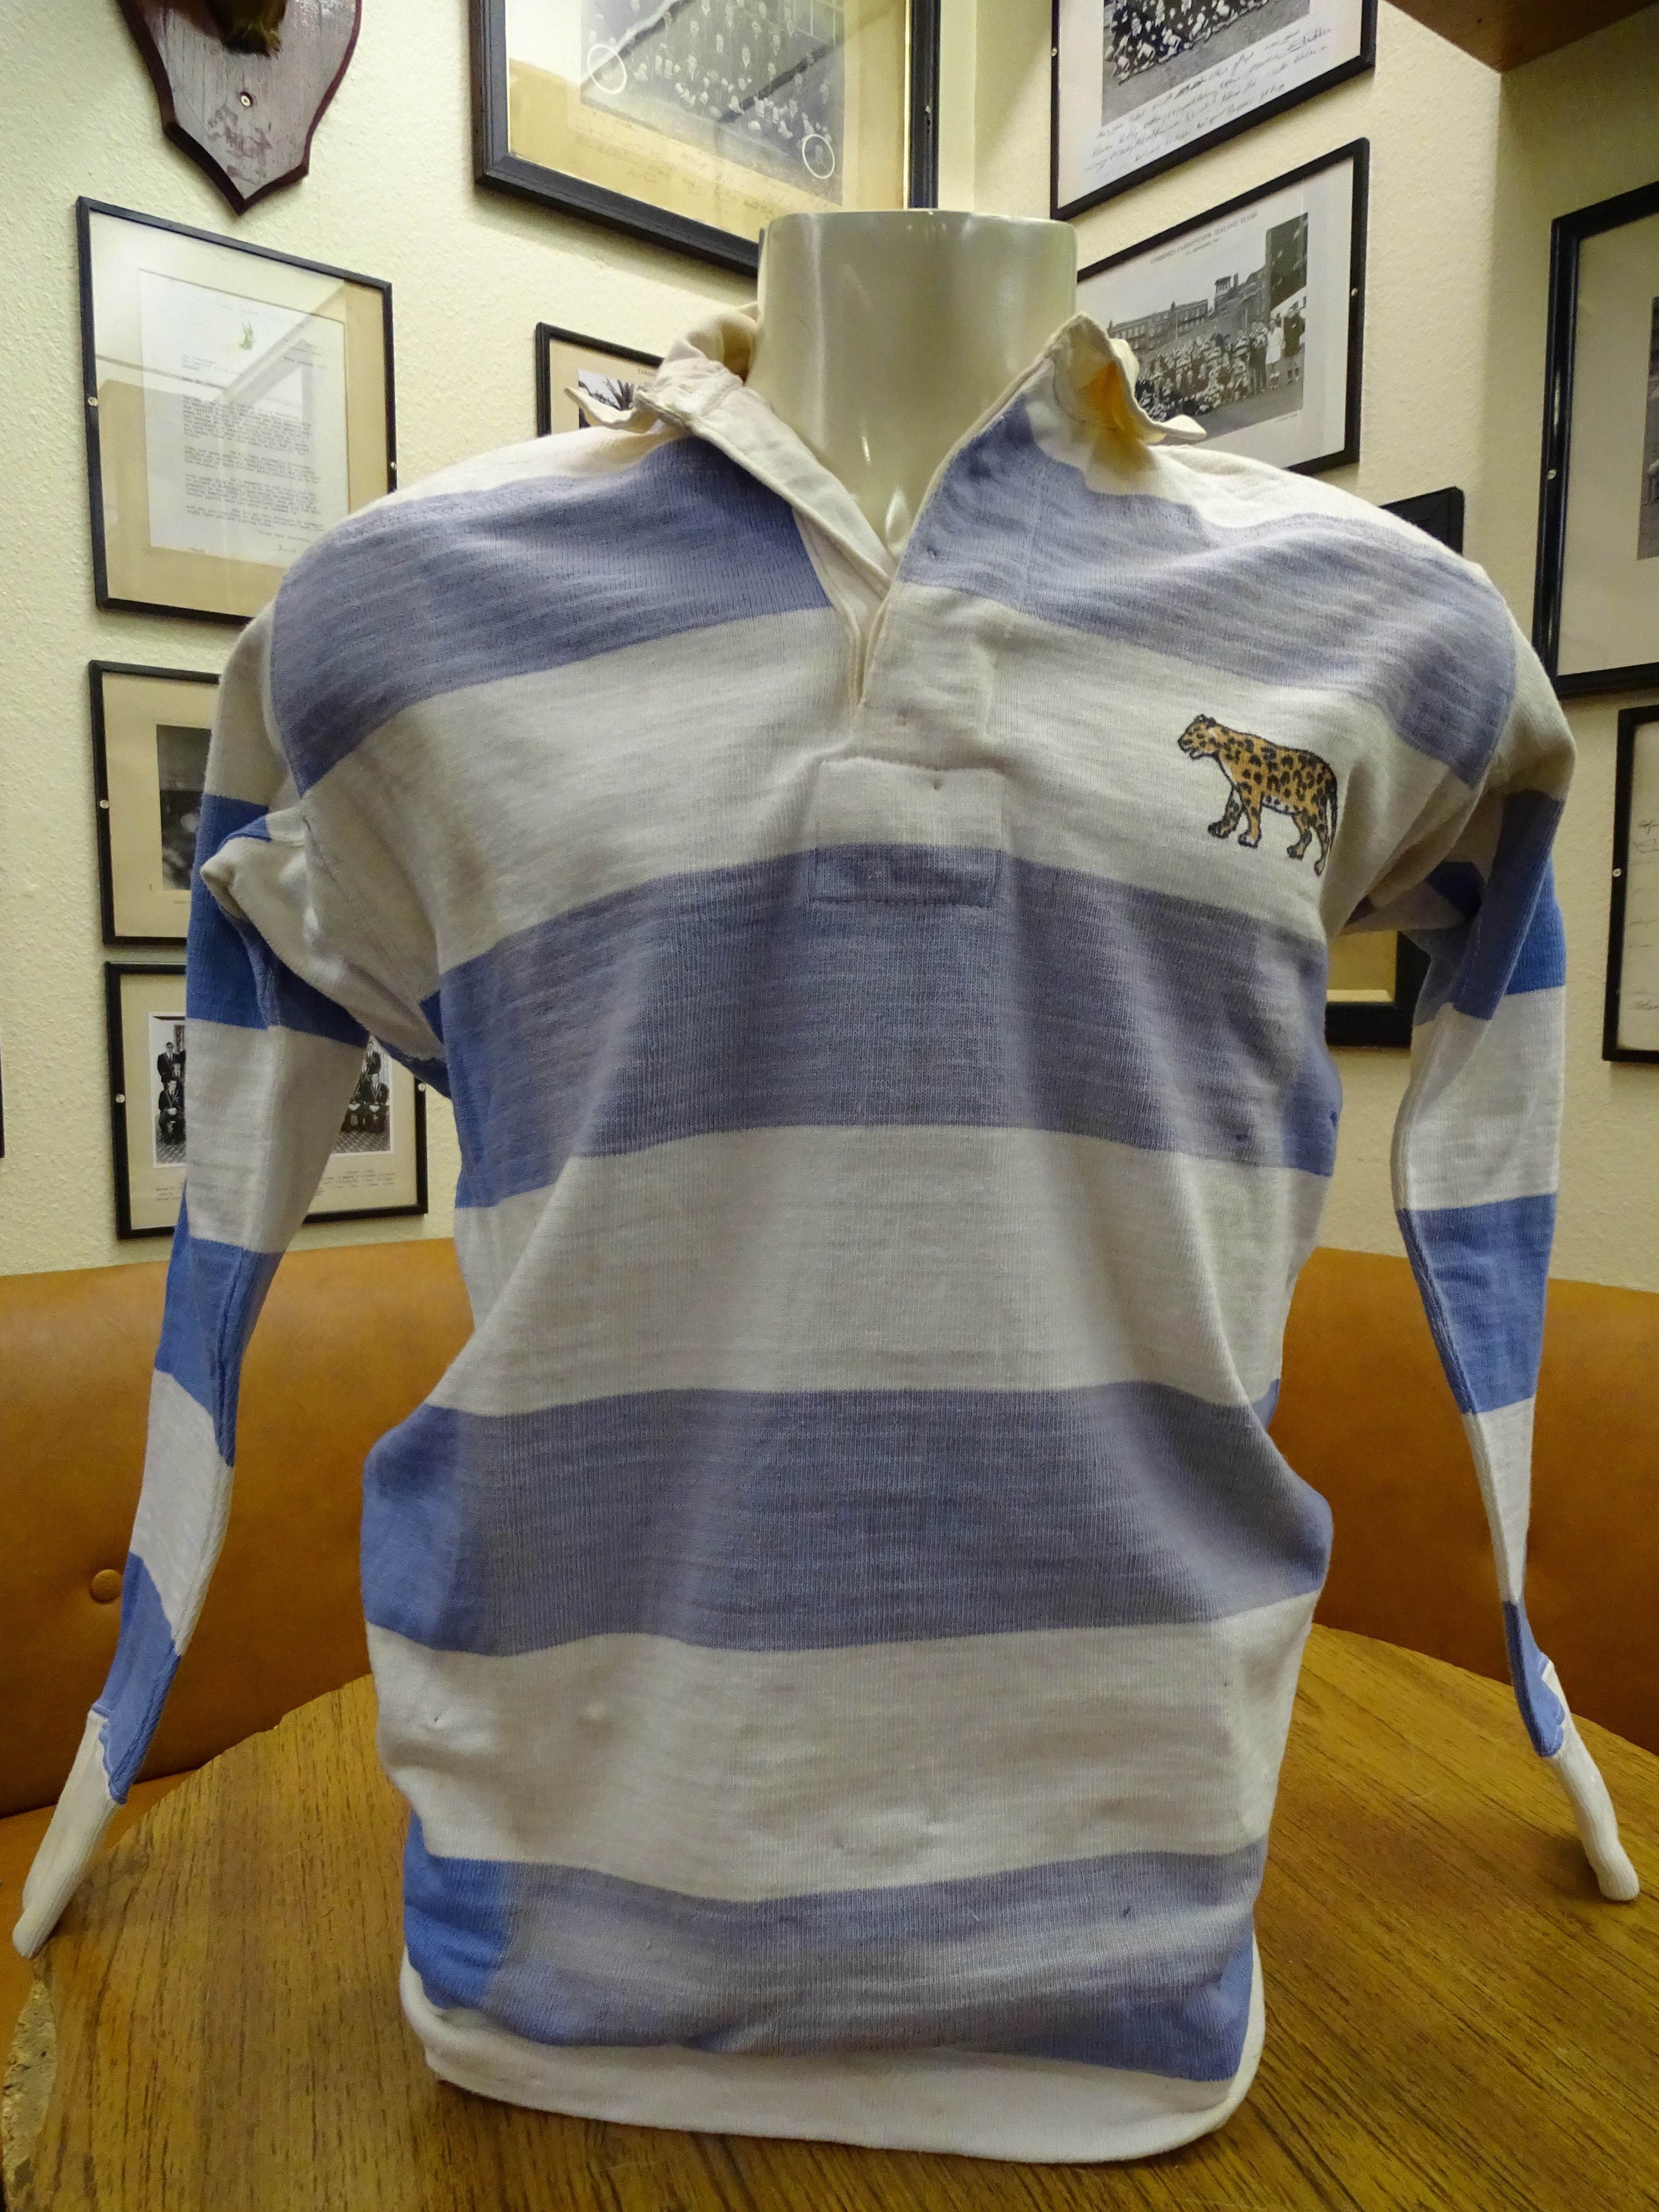 Jersey - Argentina 1976 | Cardiff Rugby Museum